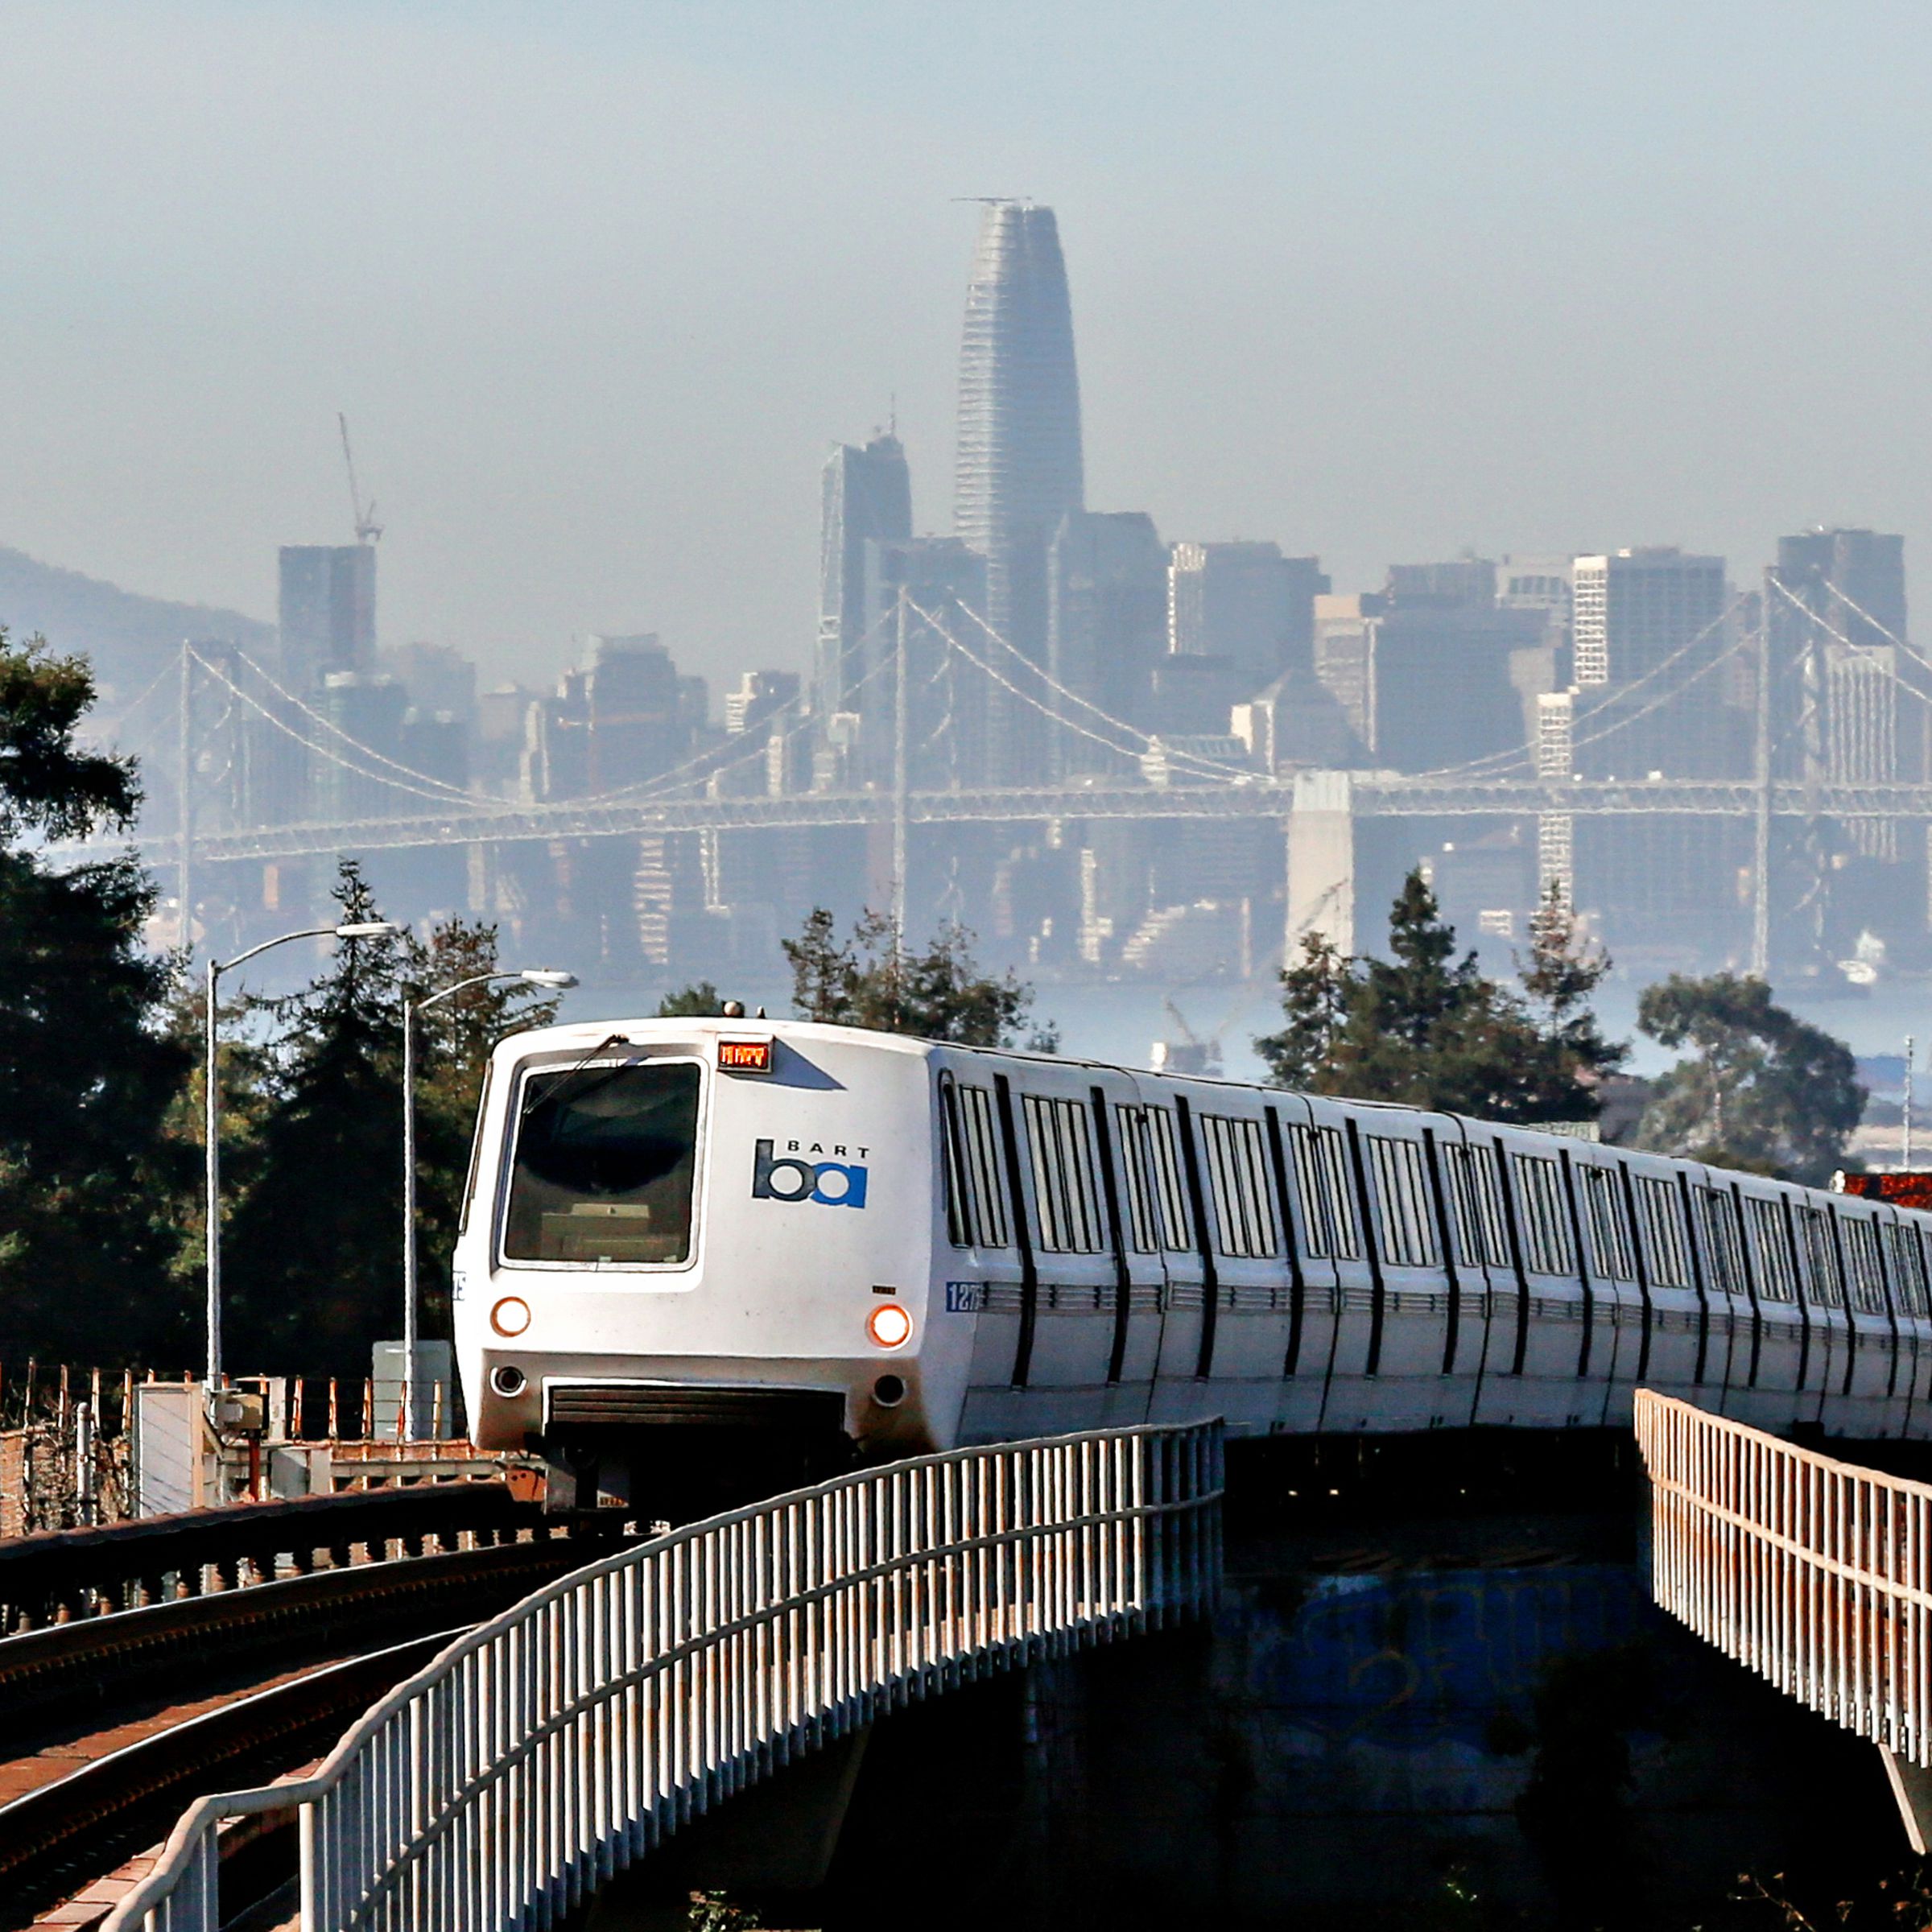 A train approaches MacArthur BART Station on Friday, November 2, 2018 in Oakland, Calif.